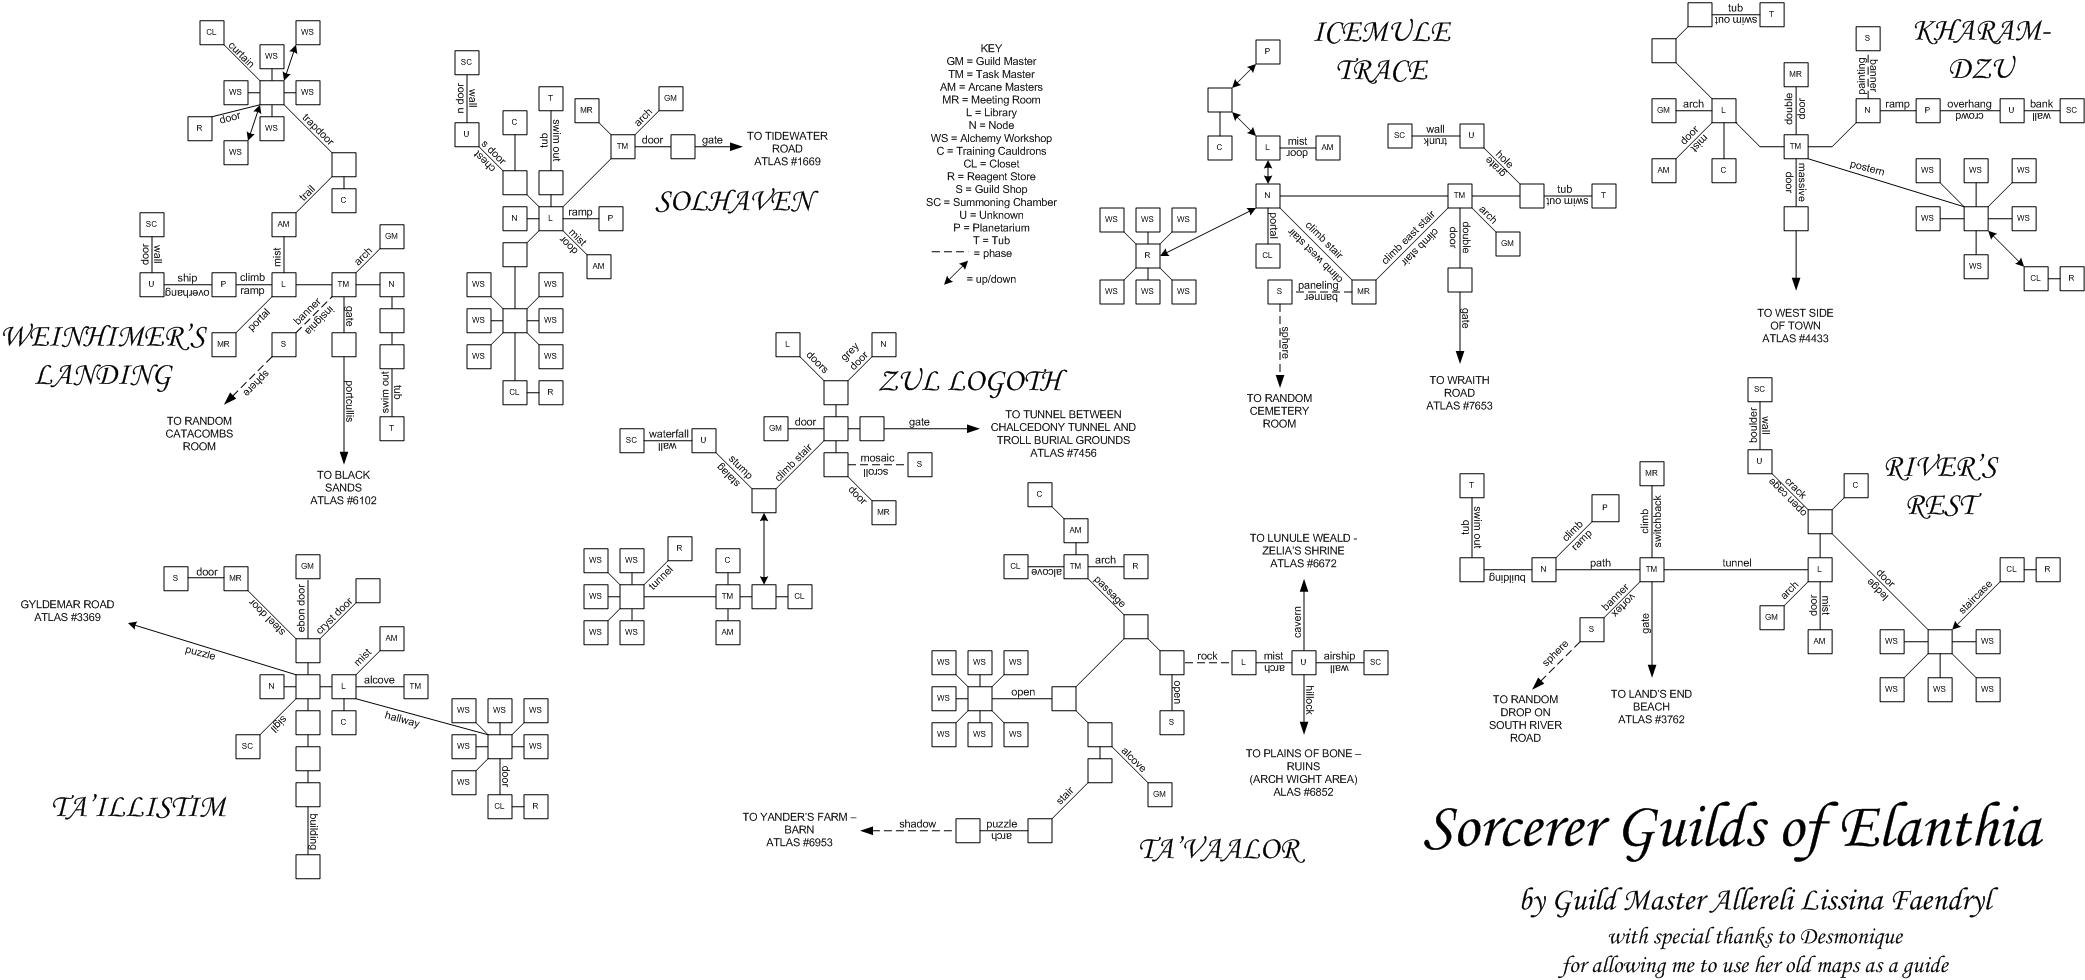 Map of the Sorcerer Guilds